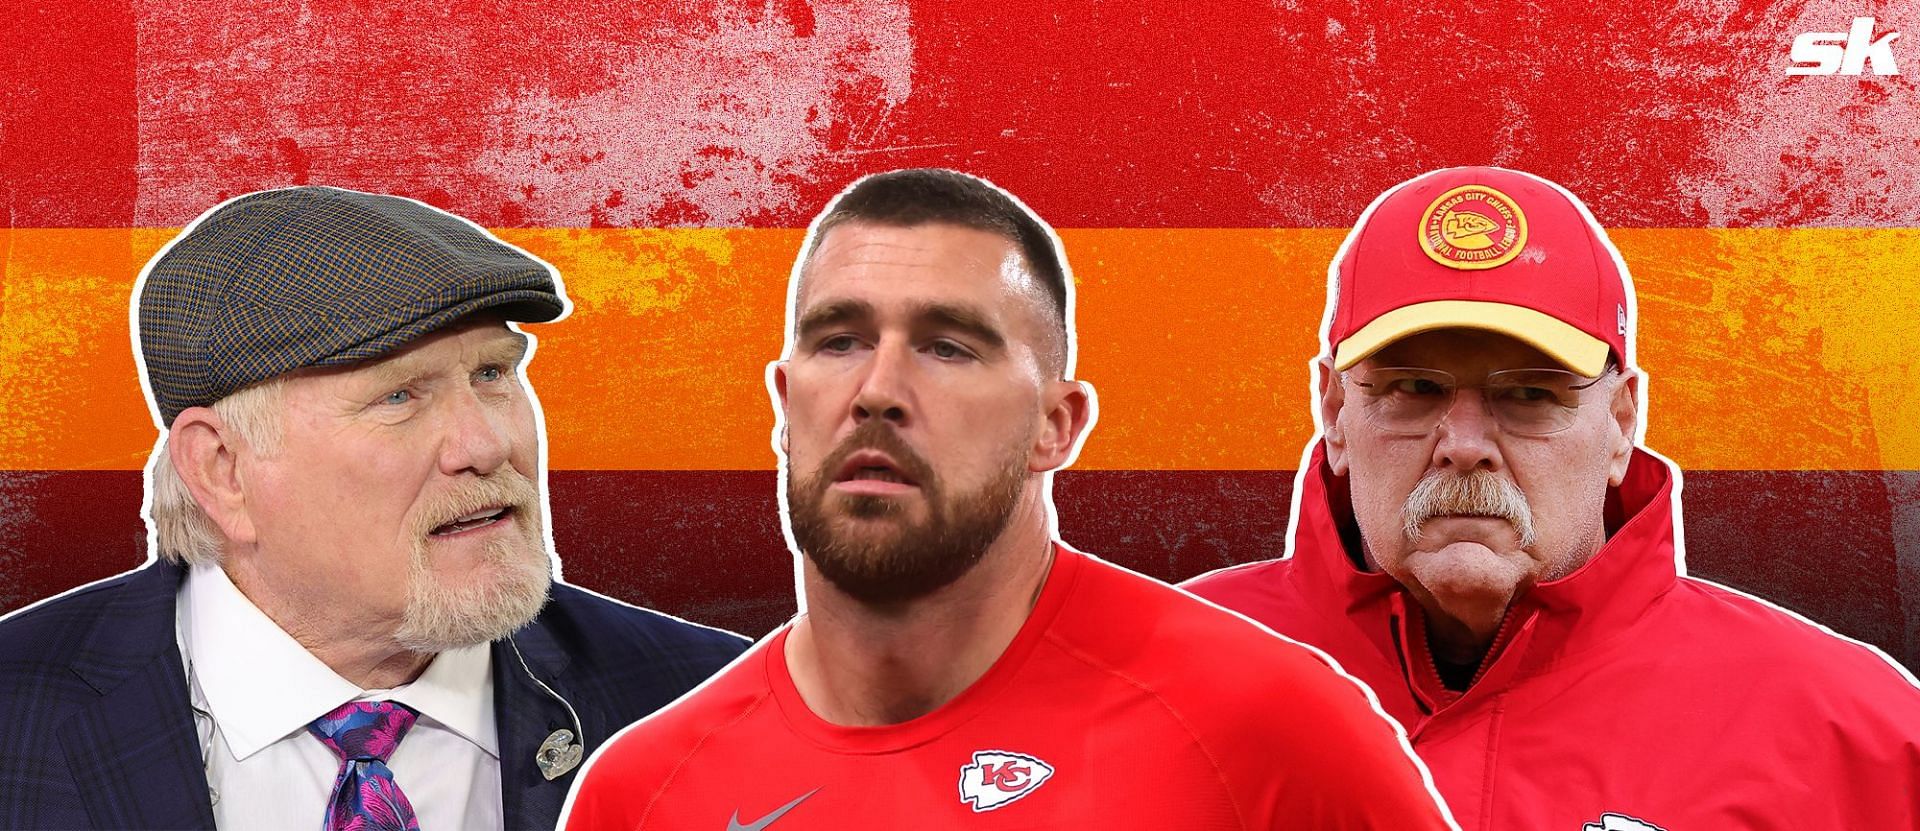 Terry Bradshaw weighs in on Travis Kelce and Andy Reid